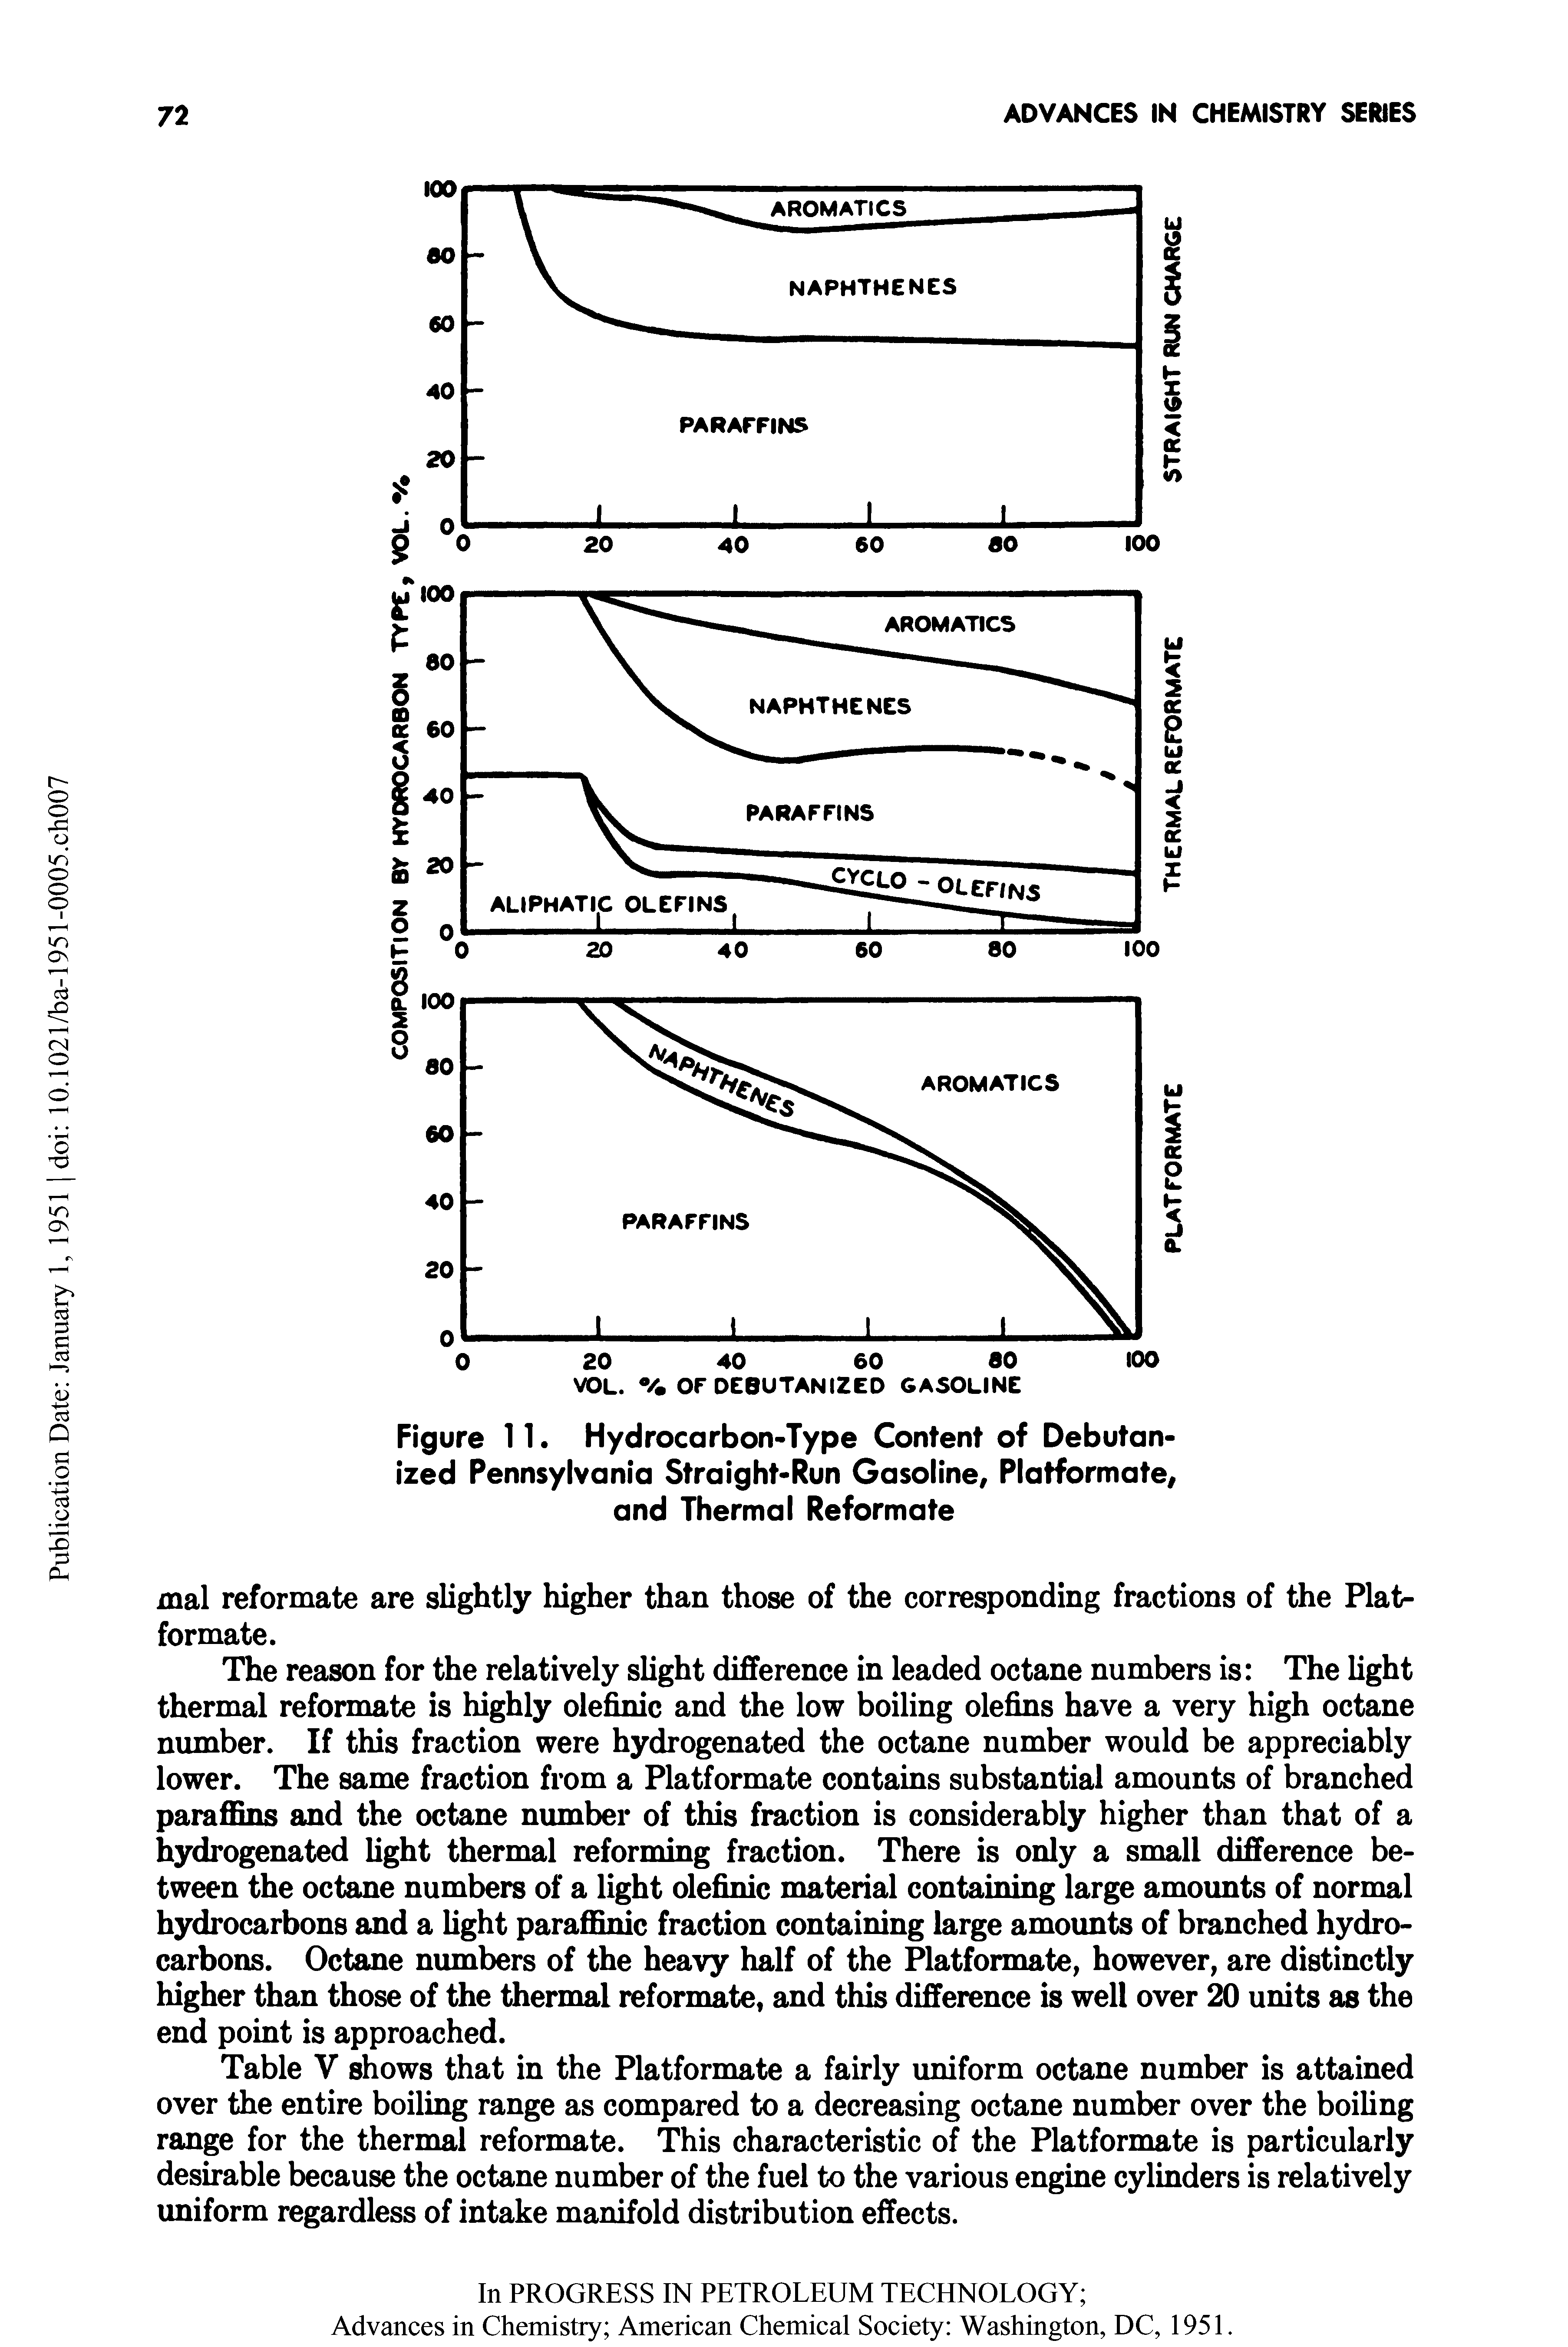 Table V shows that in the Platformate a fairly uniform octane number is attained over the entire boiling range as compared to a decreasing octane number over the boiling range for the thermal reformate. This characteristic of the Platformate is particularly desirable because the octane number of the fuel to the various engine cylinders is relatively uniform regardless of intake manifold distribution effects.